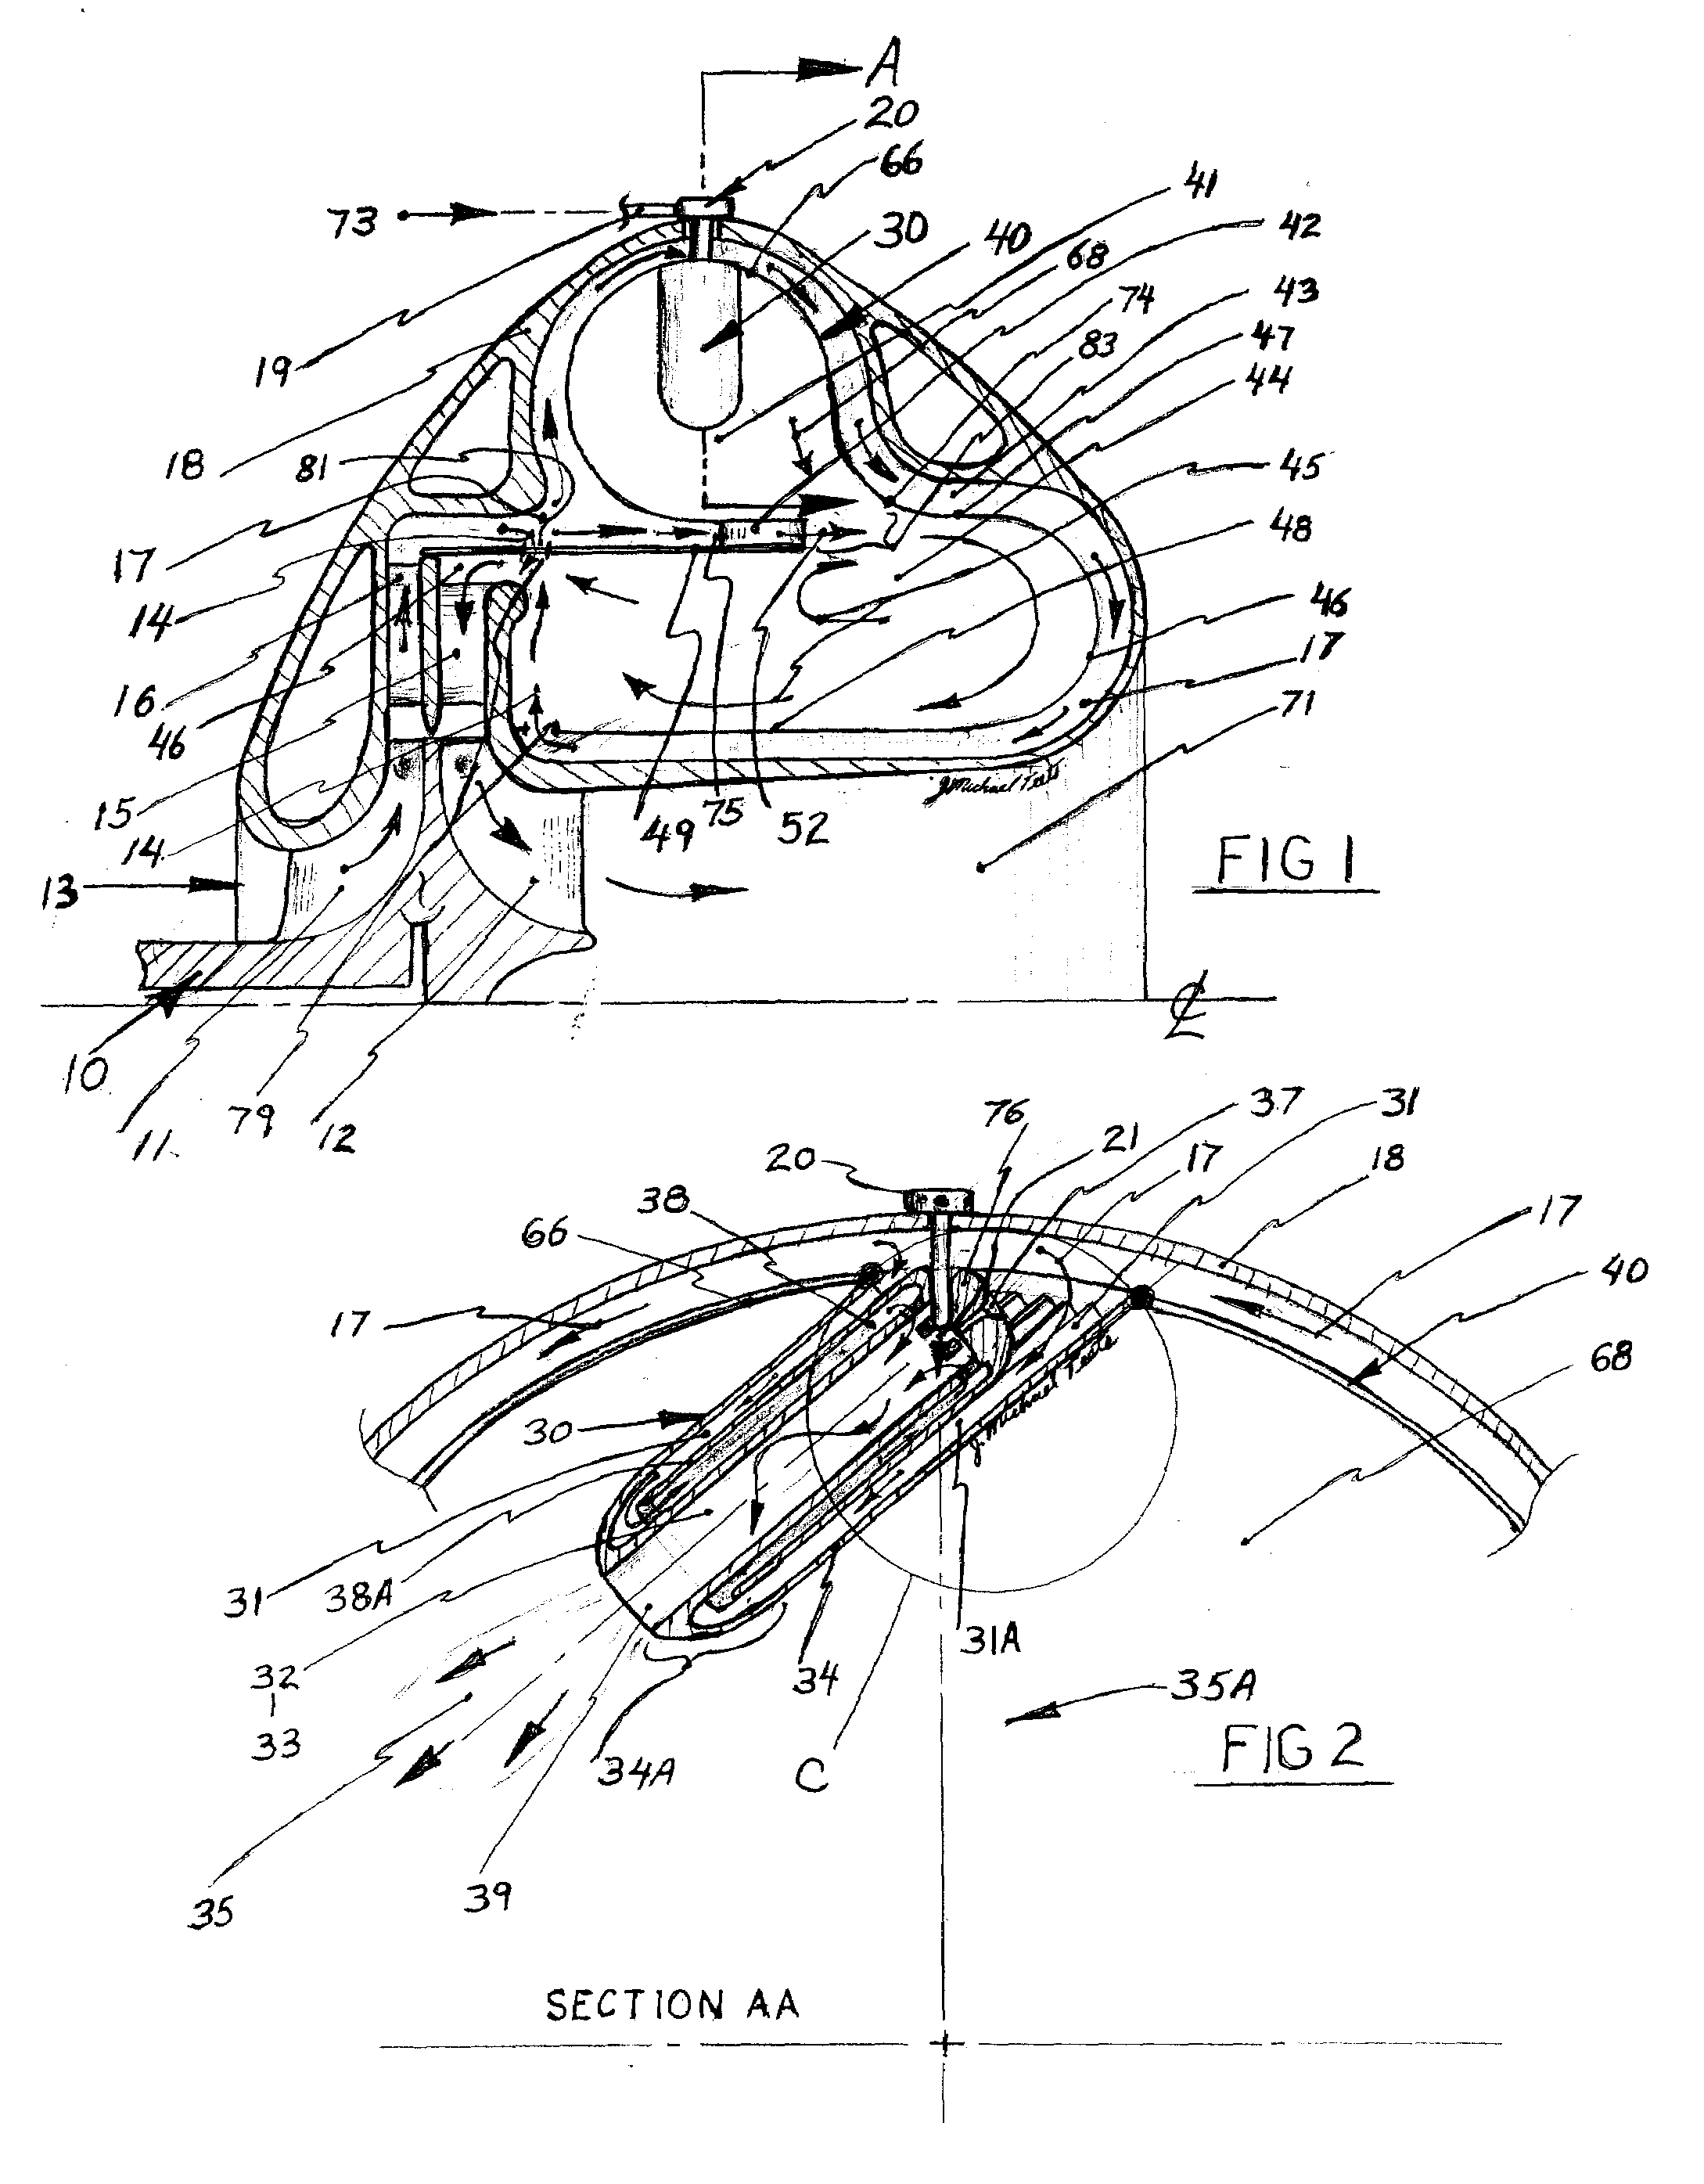 Radially staged RQL combustor with tangential fuel premixers